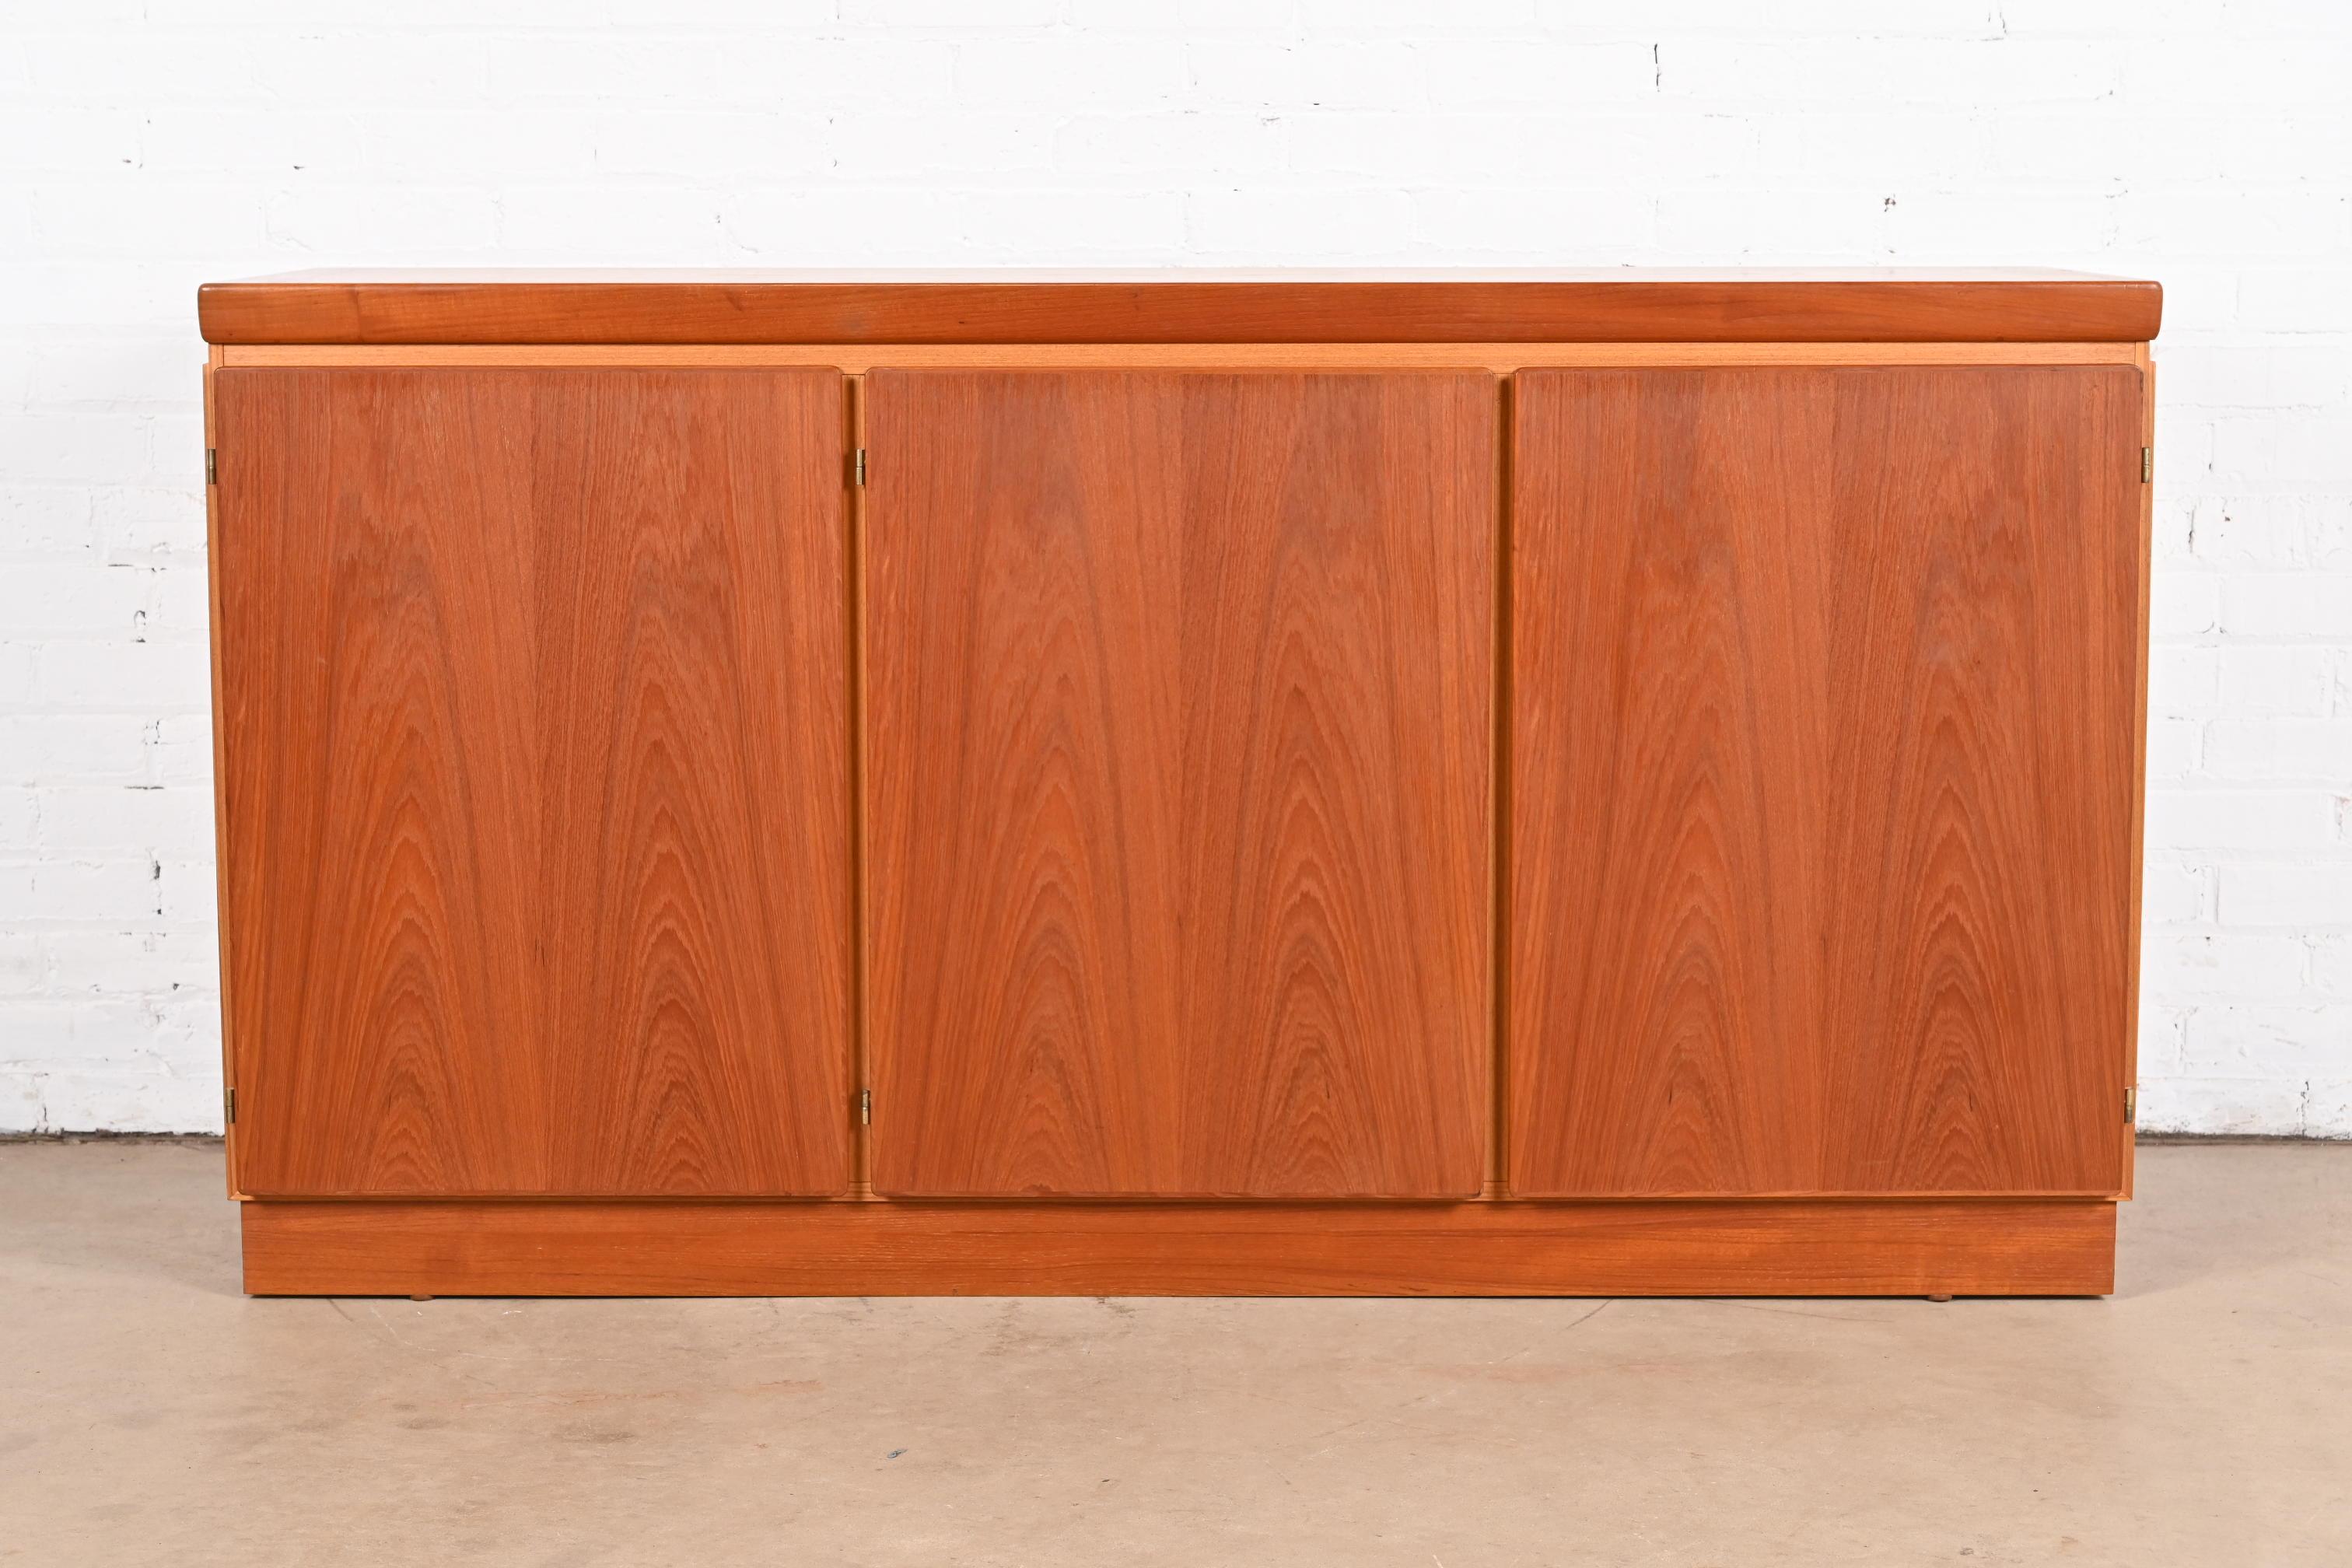 Skovby Danish Modern Teak Sideboard or Bar Cabinet, Circa 1970s In Good Condition For Sale In South Bend, IN